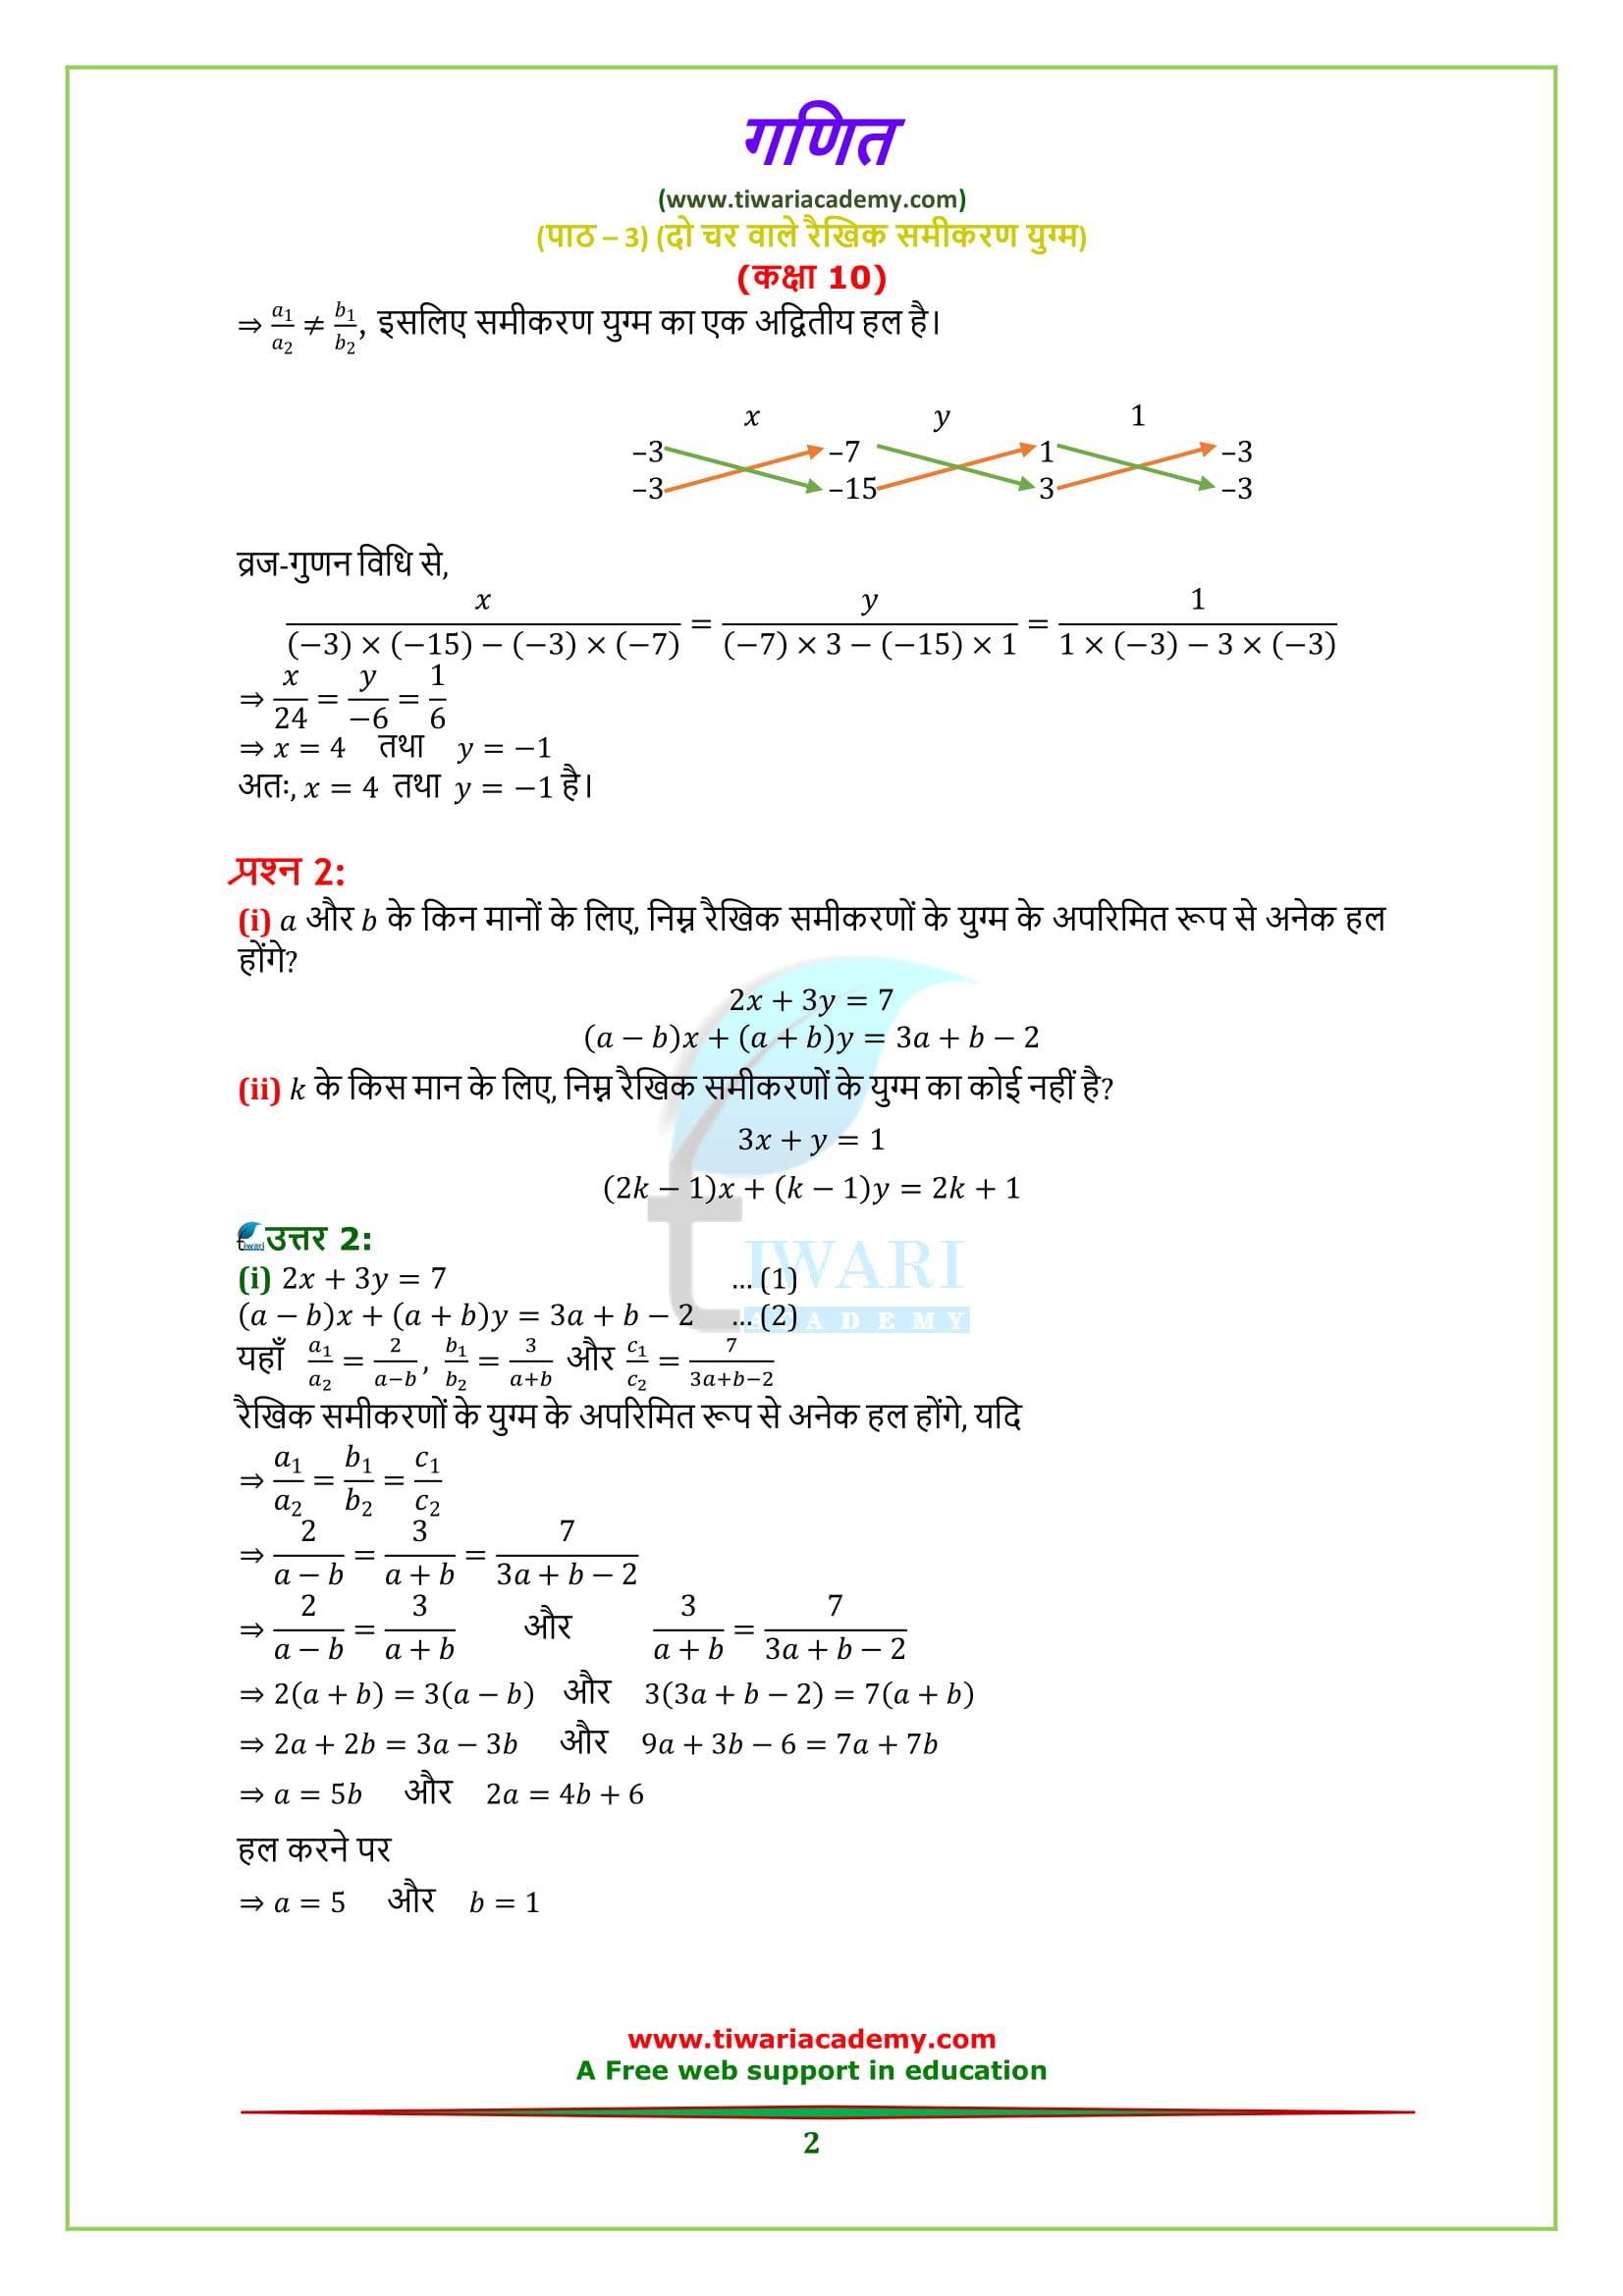 NCERT Solutions for class 10 Maths Chapter 3 Exercise 3.5 in Hindi medium PDF